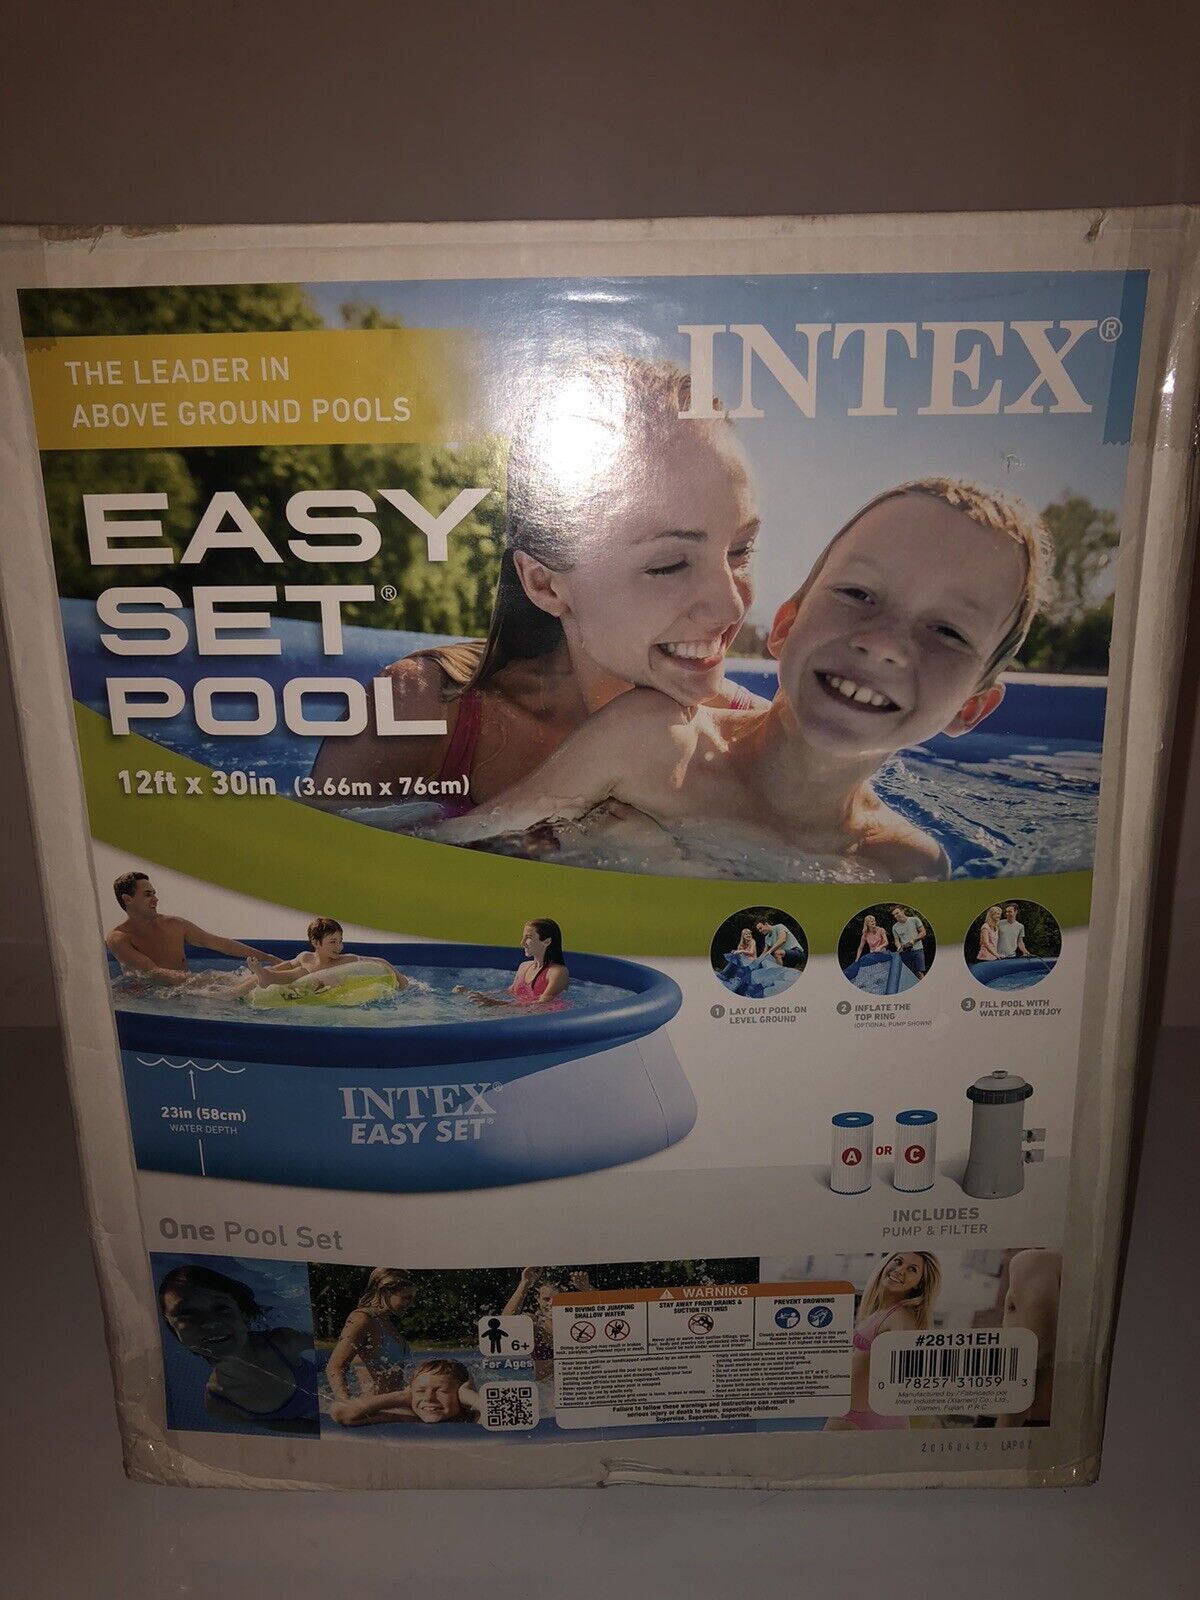 BRAND NEW INTEX 12 Industry No. 1 FT X Great interest 30 IN ABOVE GROUND WITH SET EASY POOL FI